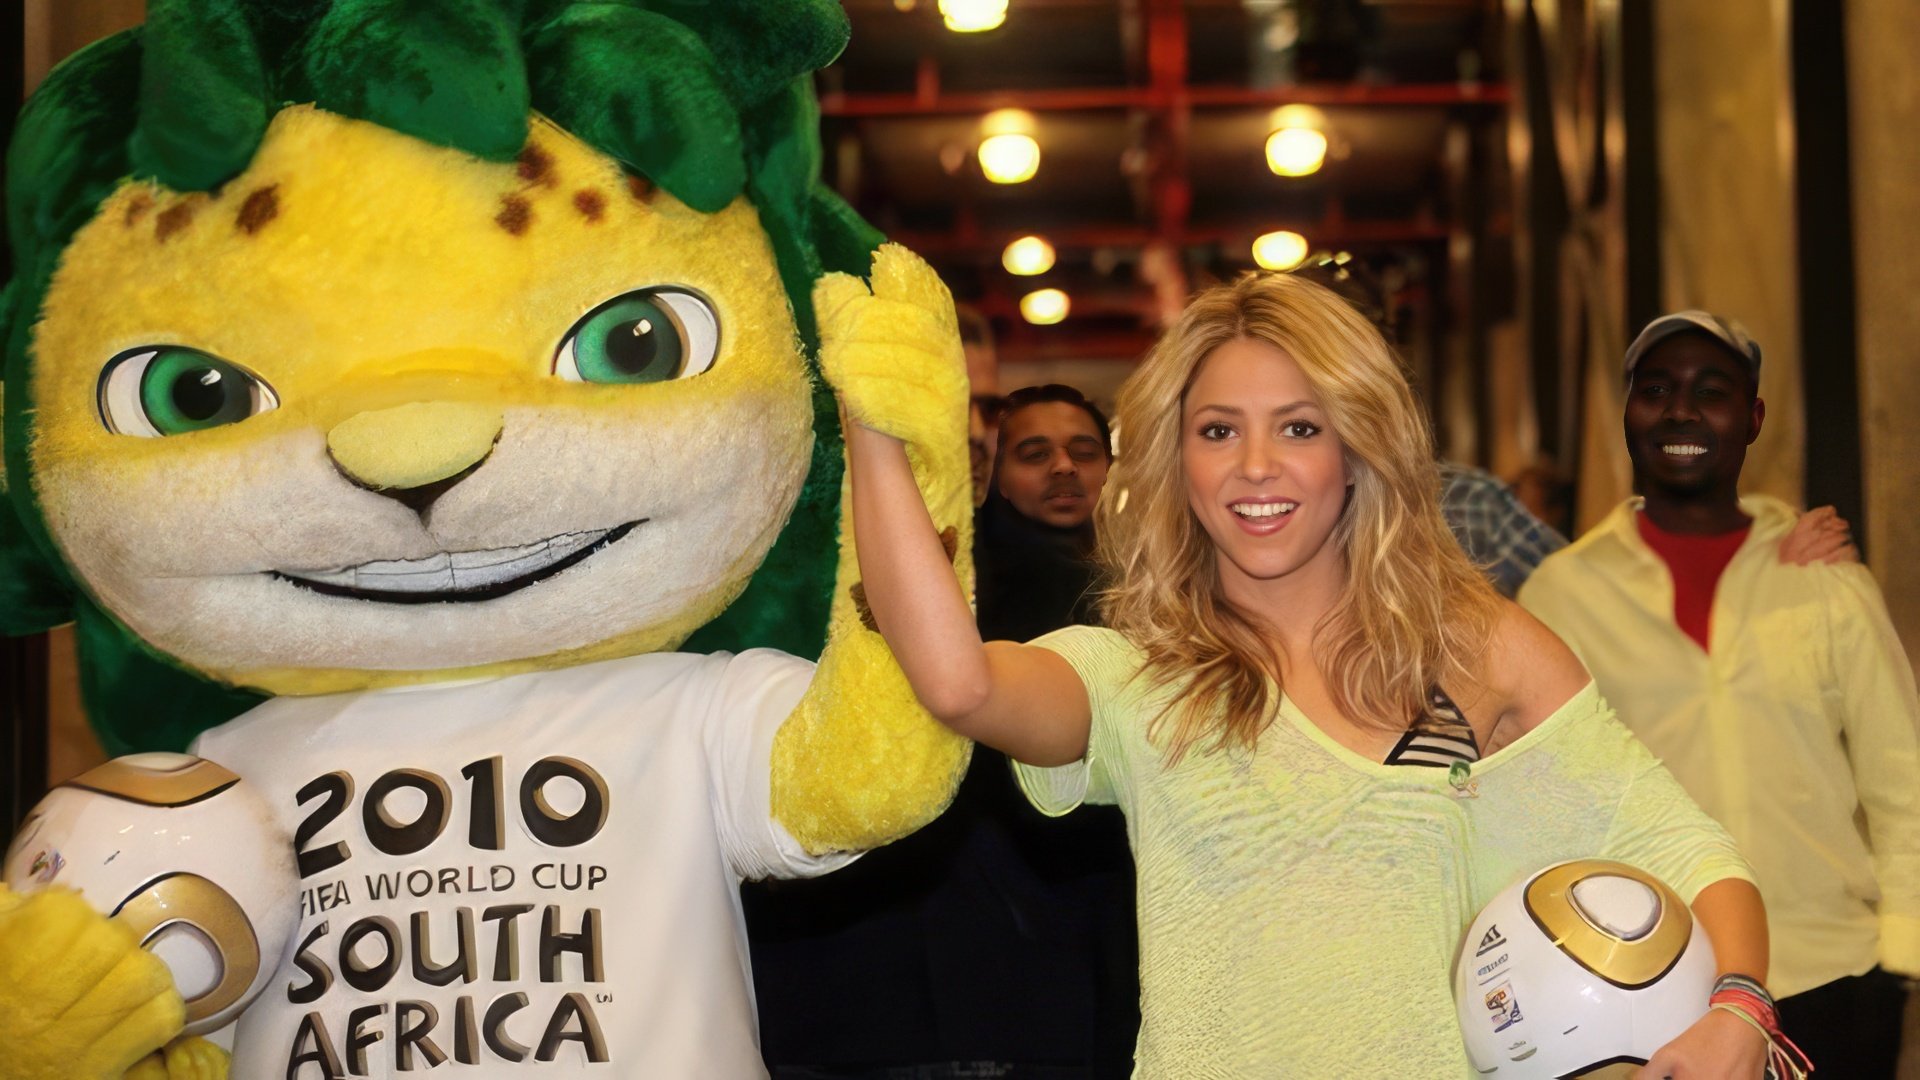 Shakira recorded the official song for the FIFA World Cup